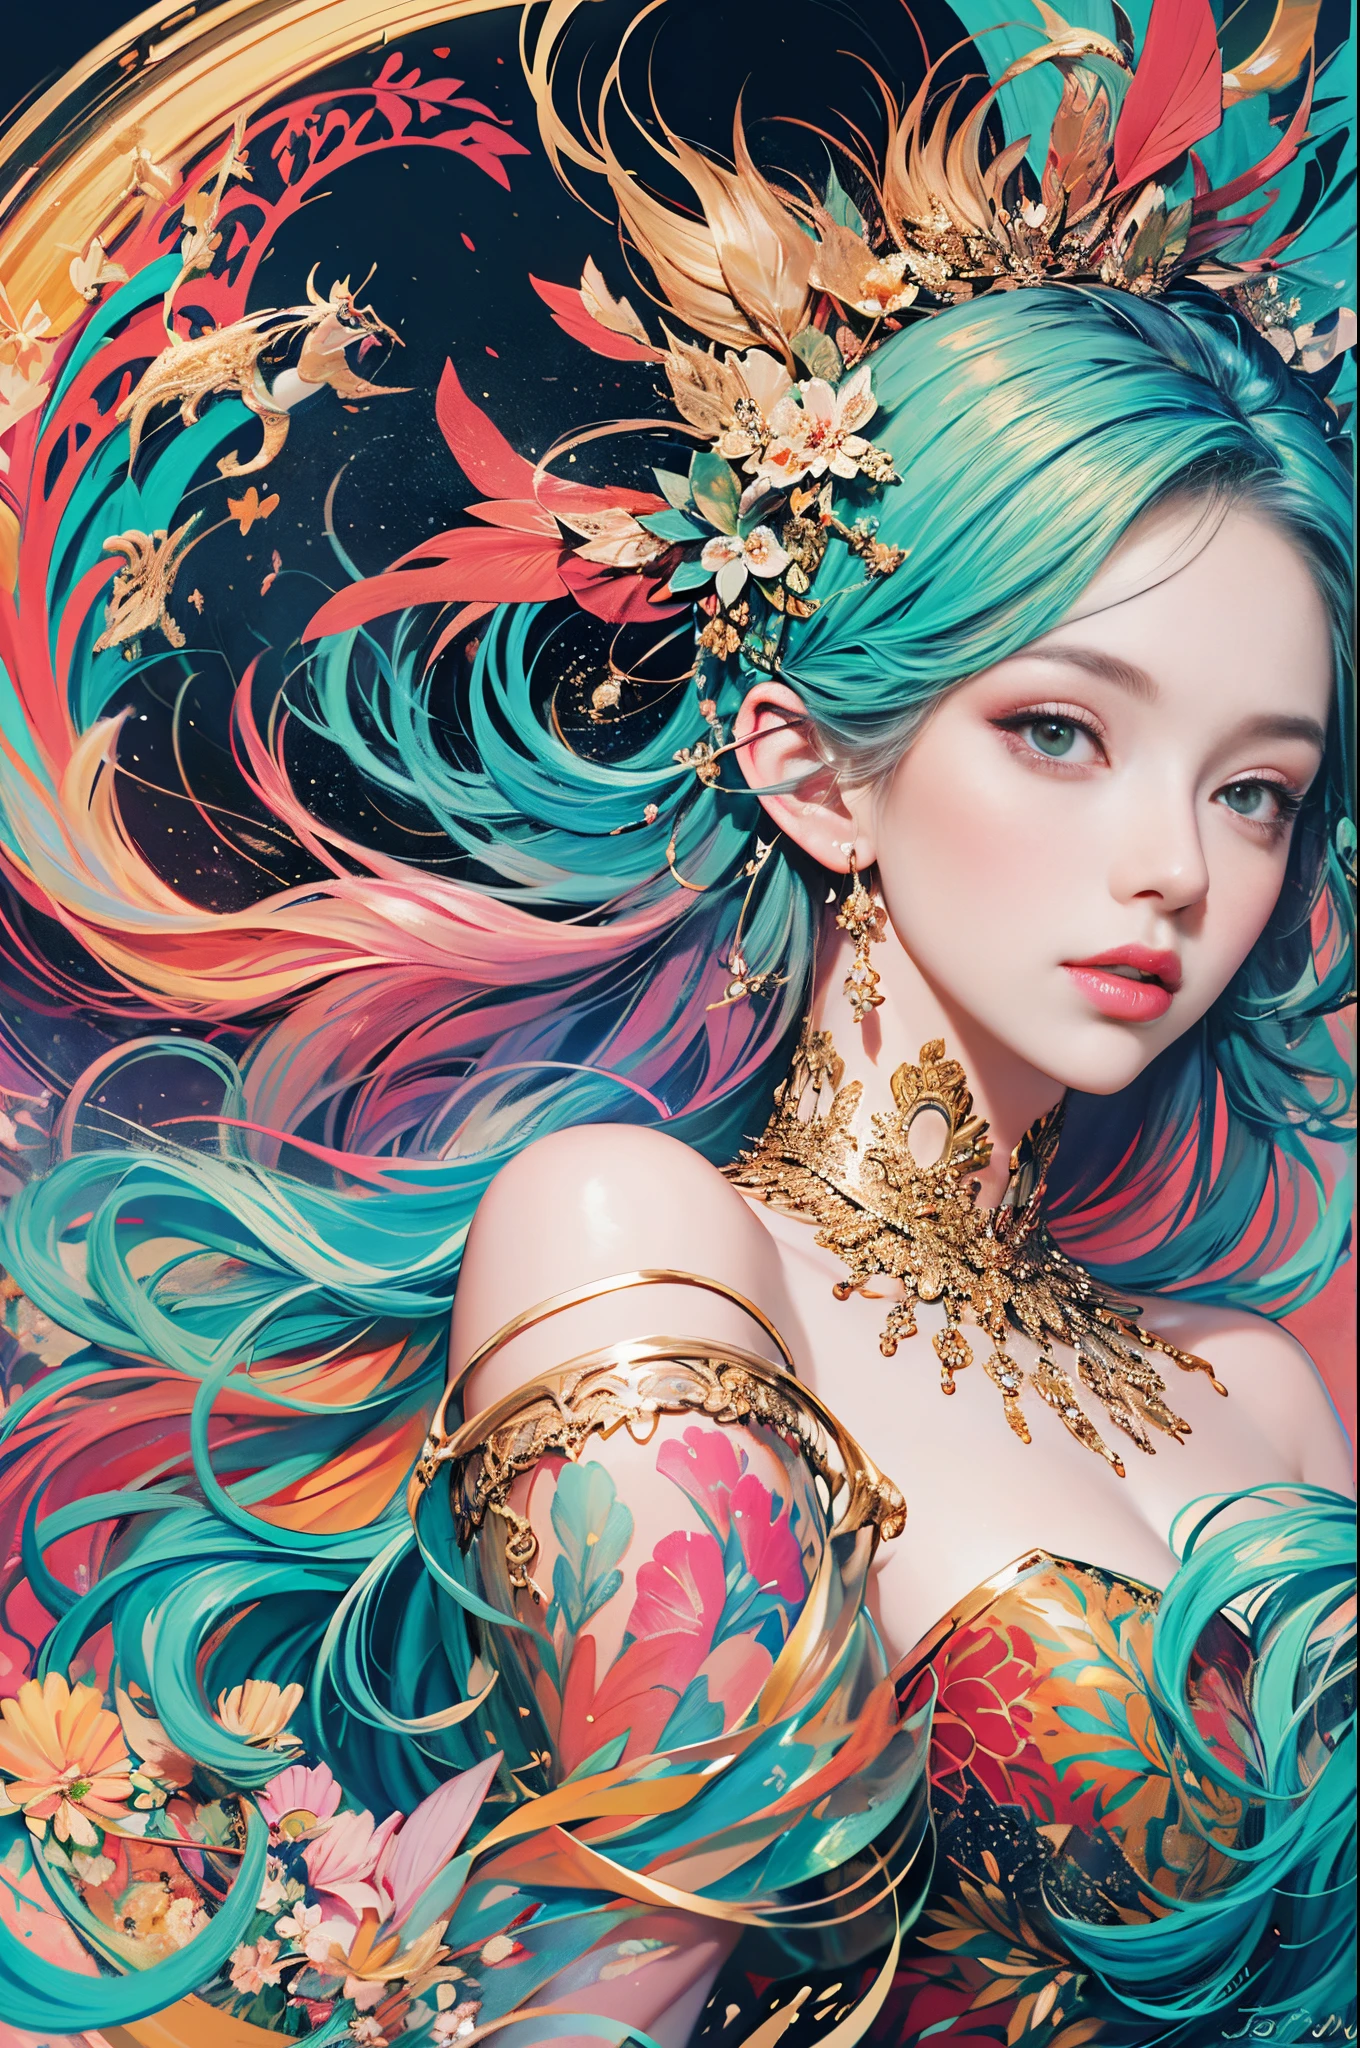 Painting of woman with long hair and colorful hair, beautiful digital illustration, stunning digital illustration, gorgeous digital art, A beautiful artistic illustration, Beautiful digital artwork, beautiful digital art, Beautiful digital illustrations, intricate digital painting, Very Beautiful Digital Art, vibrant digital painting, beautiful gorgeous digital art, Psychedelic flowing long hair, Colorful digital painting, Inspiring digital art, stylized digital art